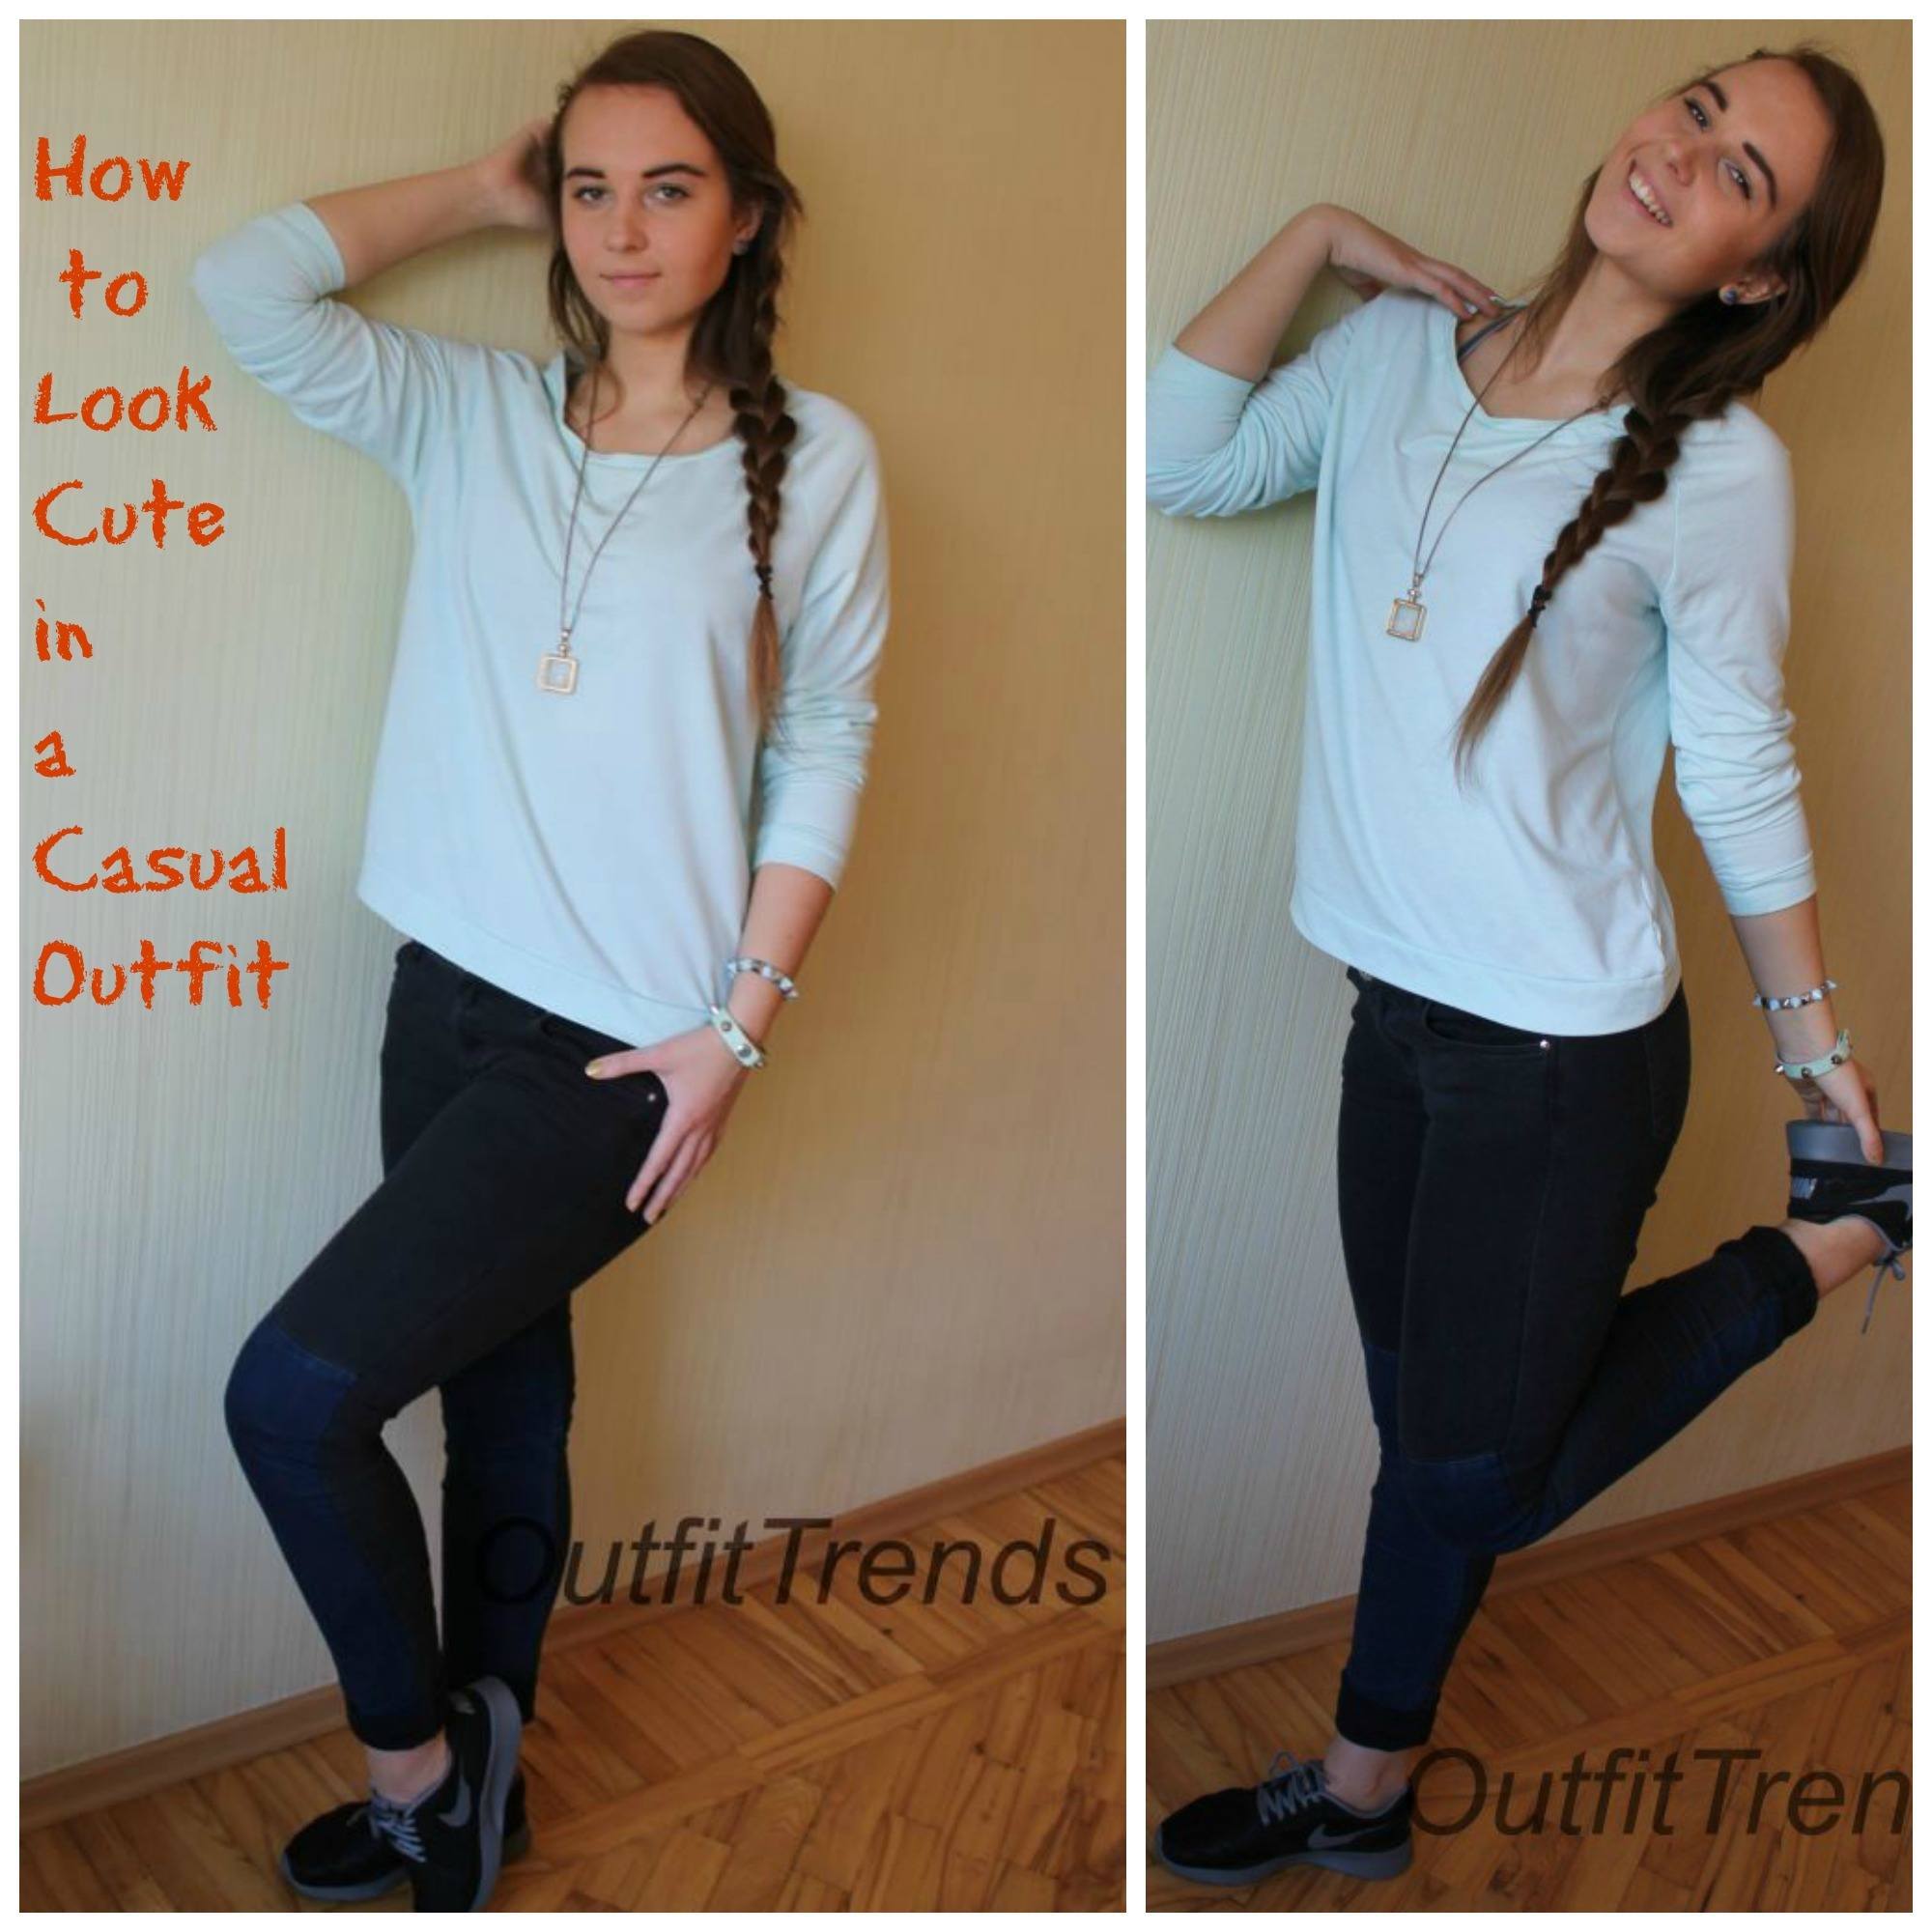 #How to Look Cute in a Casual Outfit - Fashion Tips for Teens